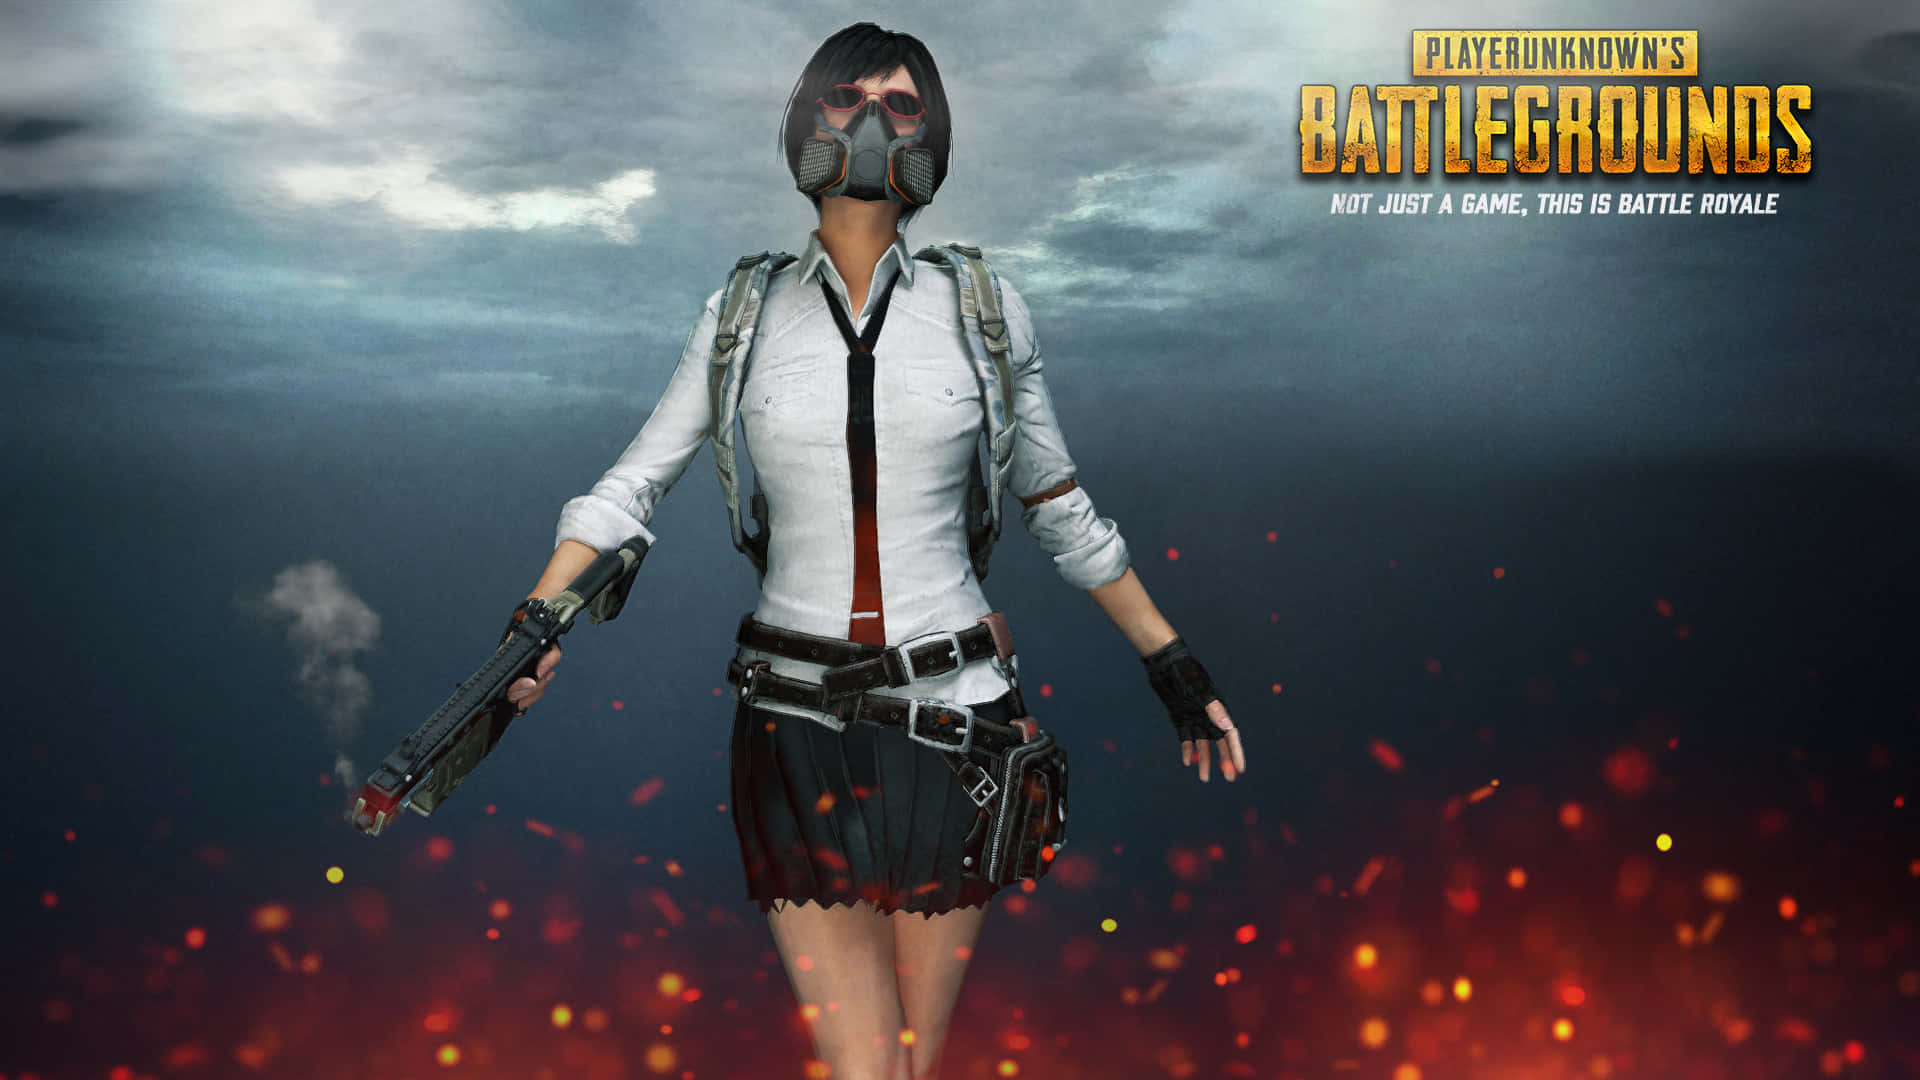 Taking the fight to the digital battlegrounds- ‘Playerunknown’s Battlegrounds'